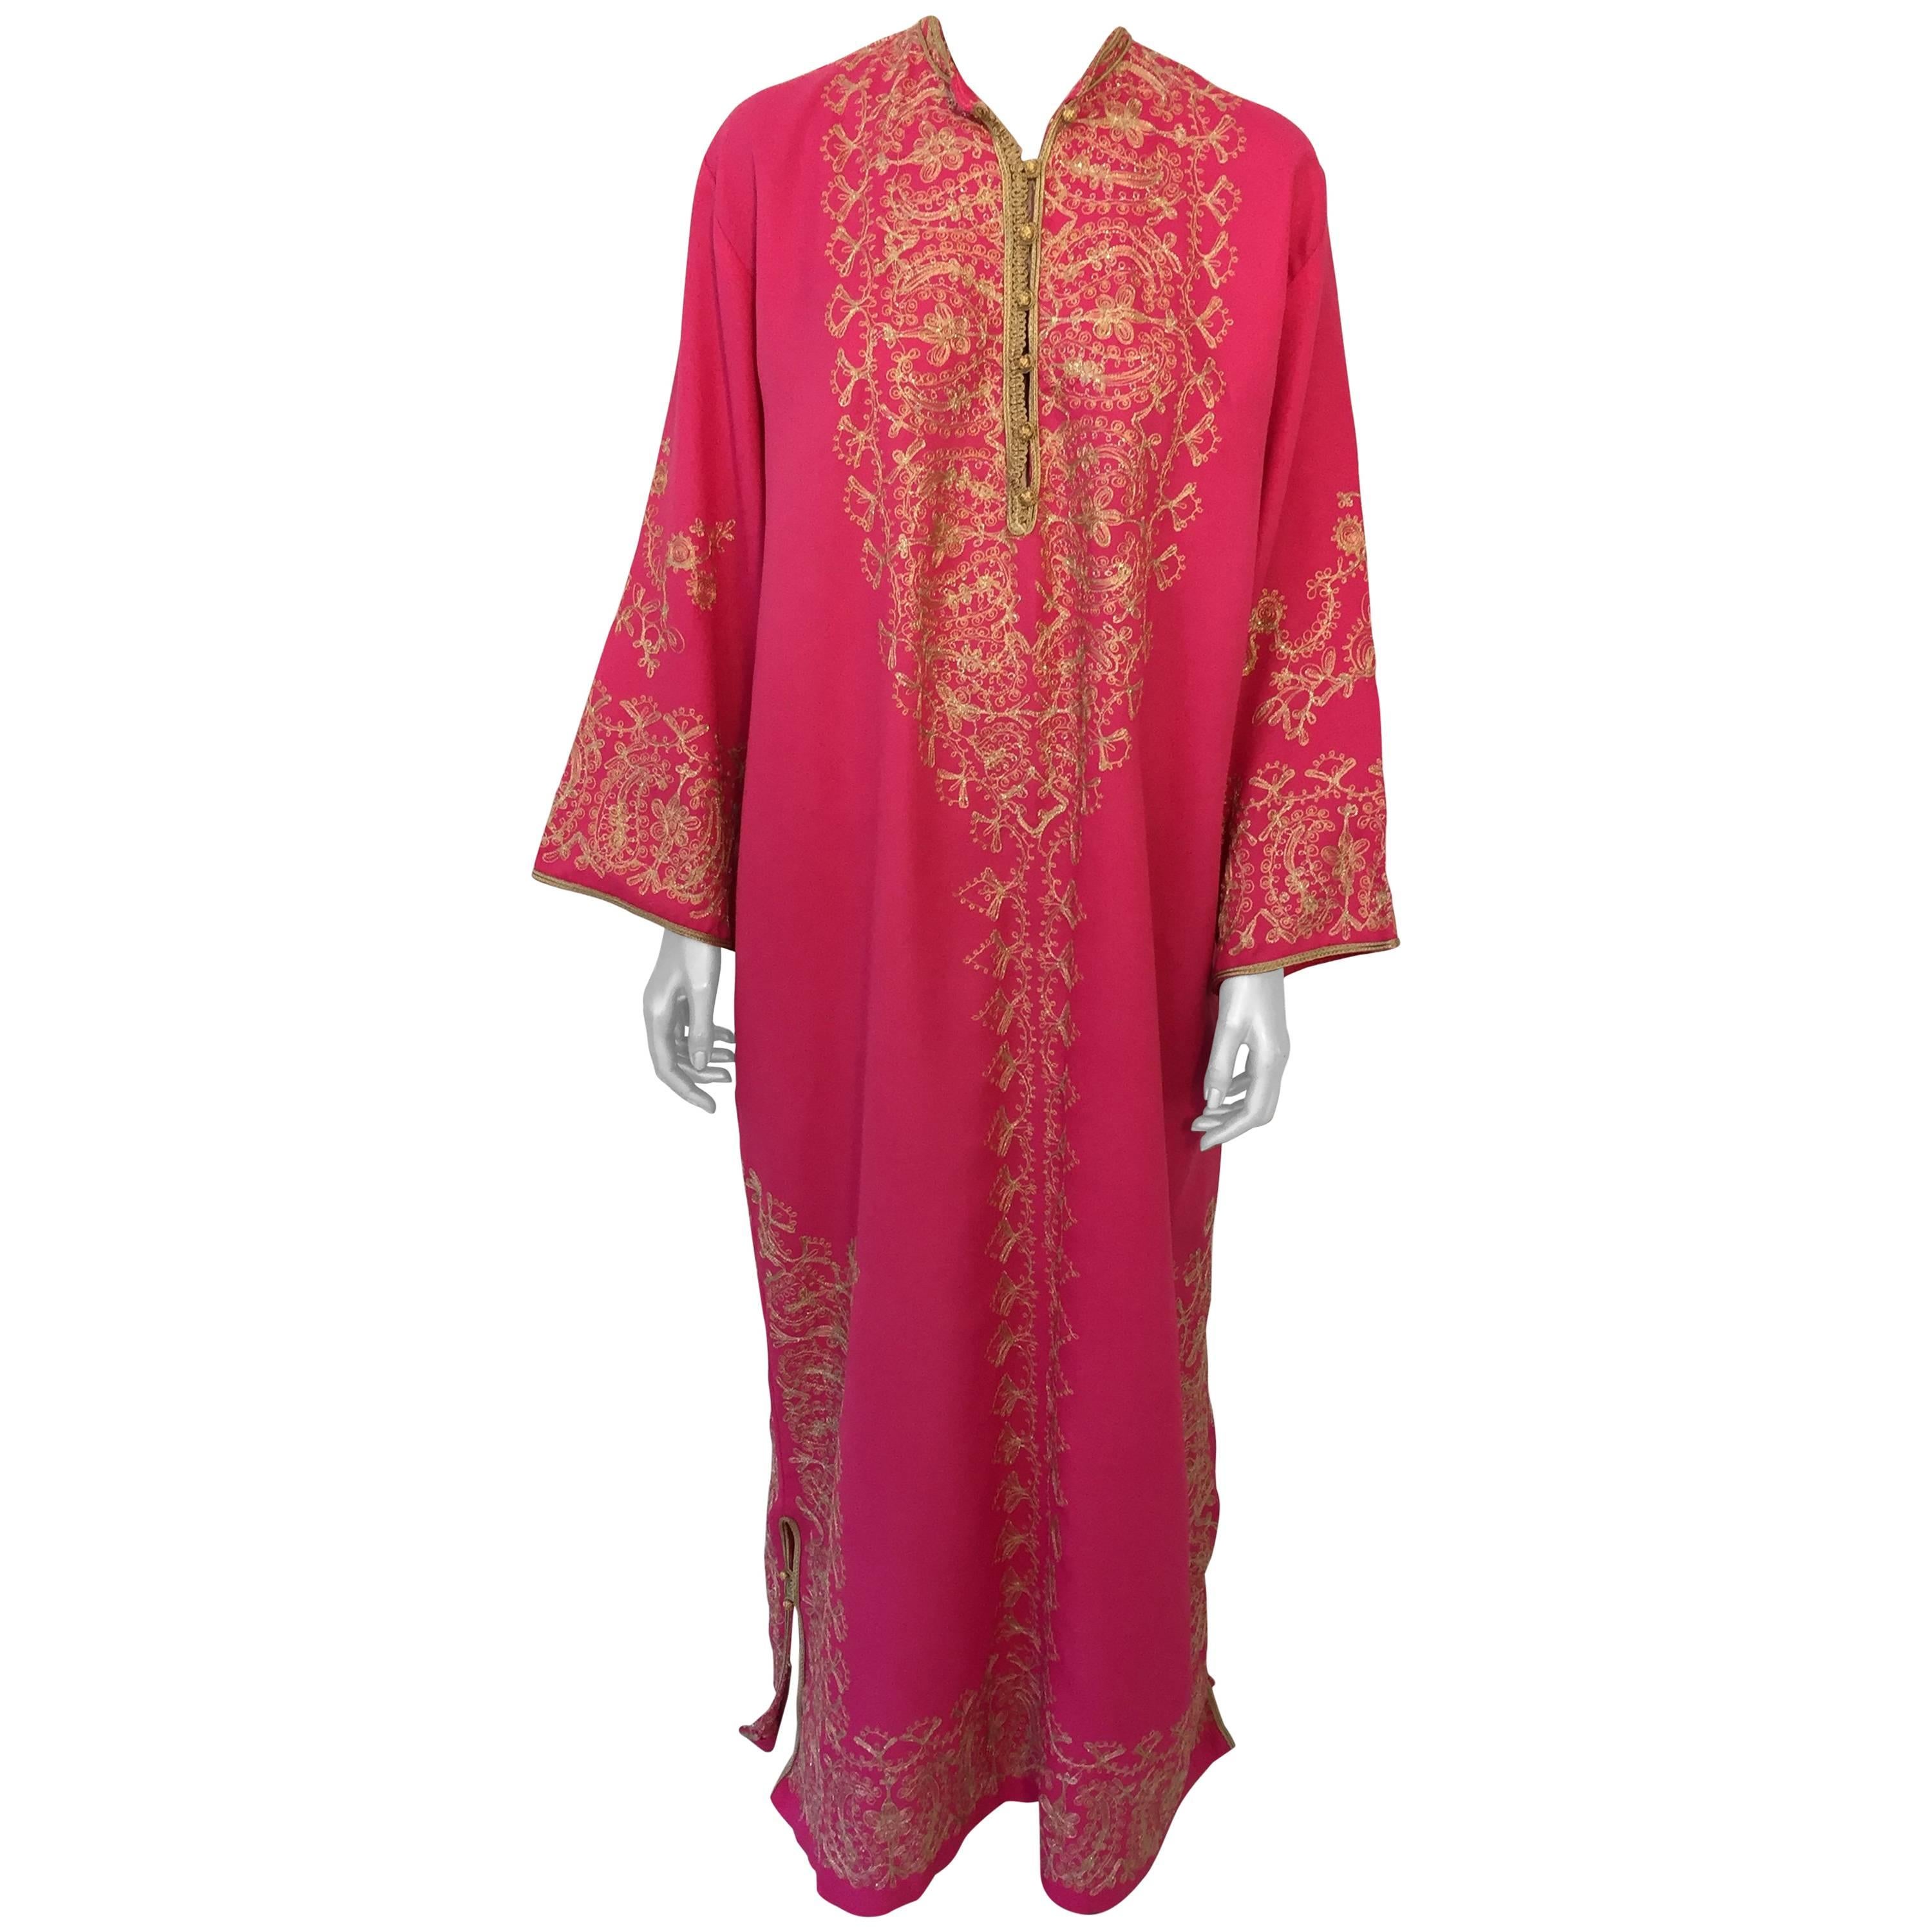 Moroccan Caftan Hot Pink with Gold Embroideries Size L